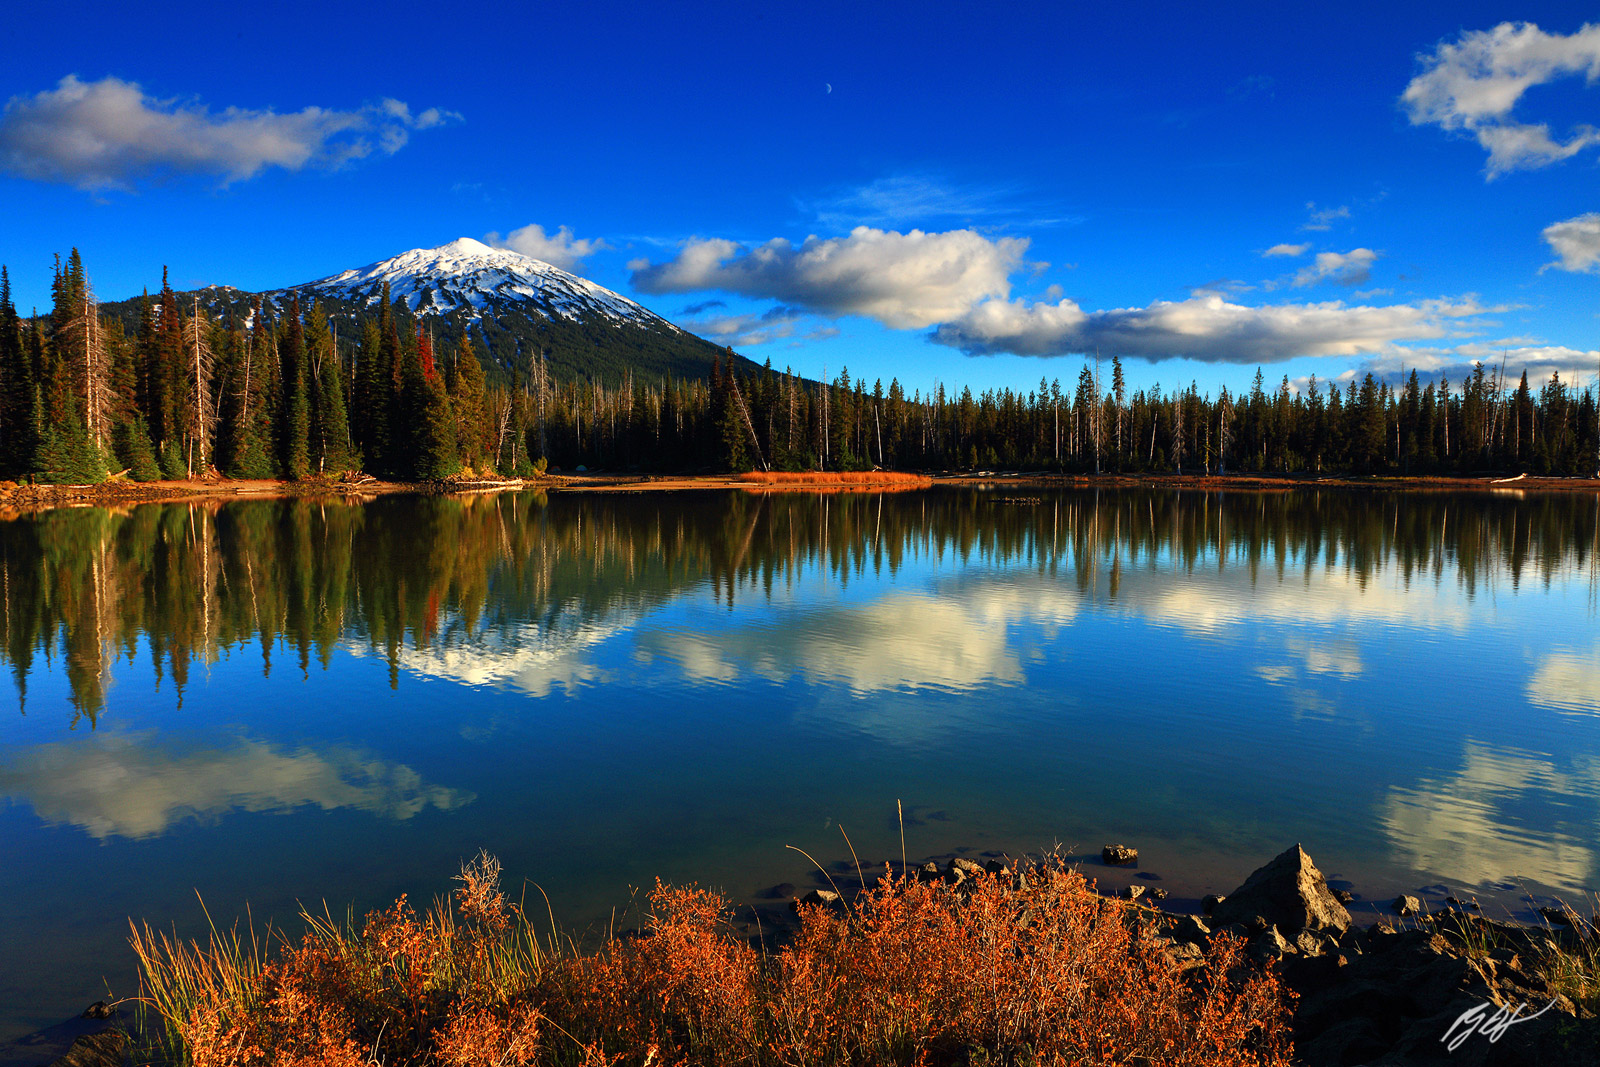 Mt Bachelor Reflected in Sparks Lake in the Deschutes National Forest in Oregon